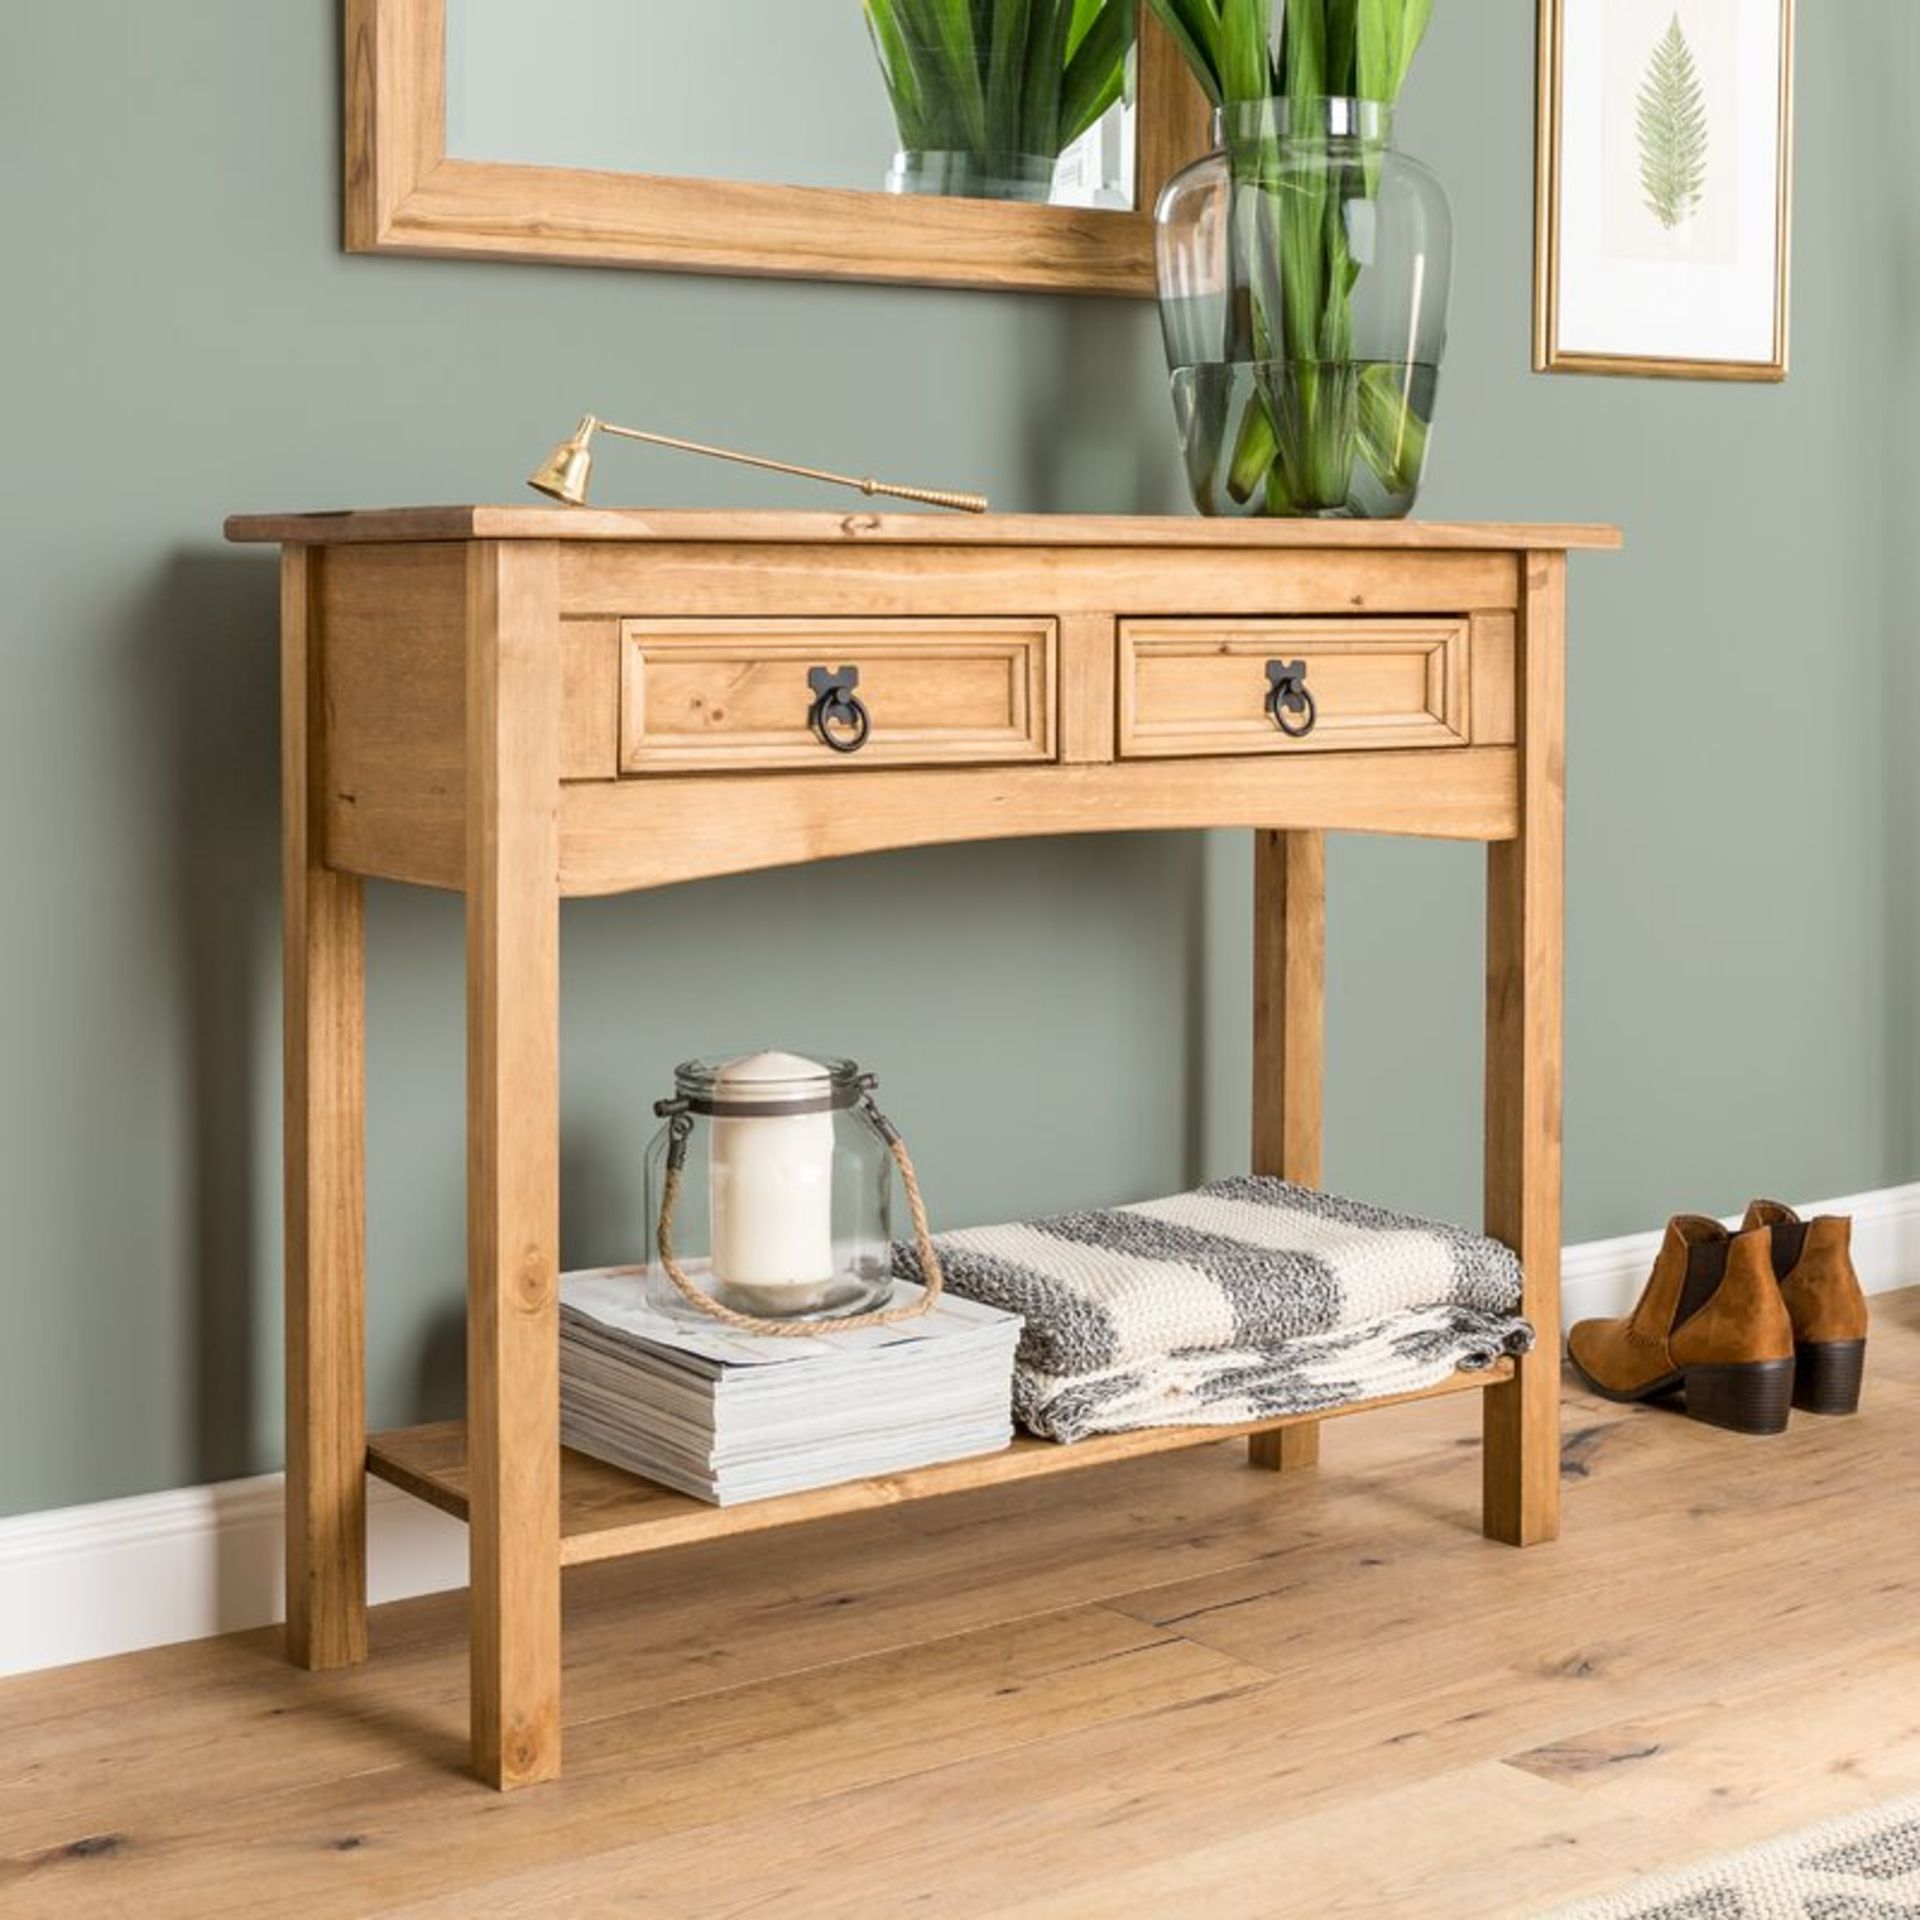 Dodge 83Cm Solid Wood Console Table - RRP £96.99. - Image 2 of 6